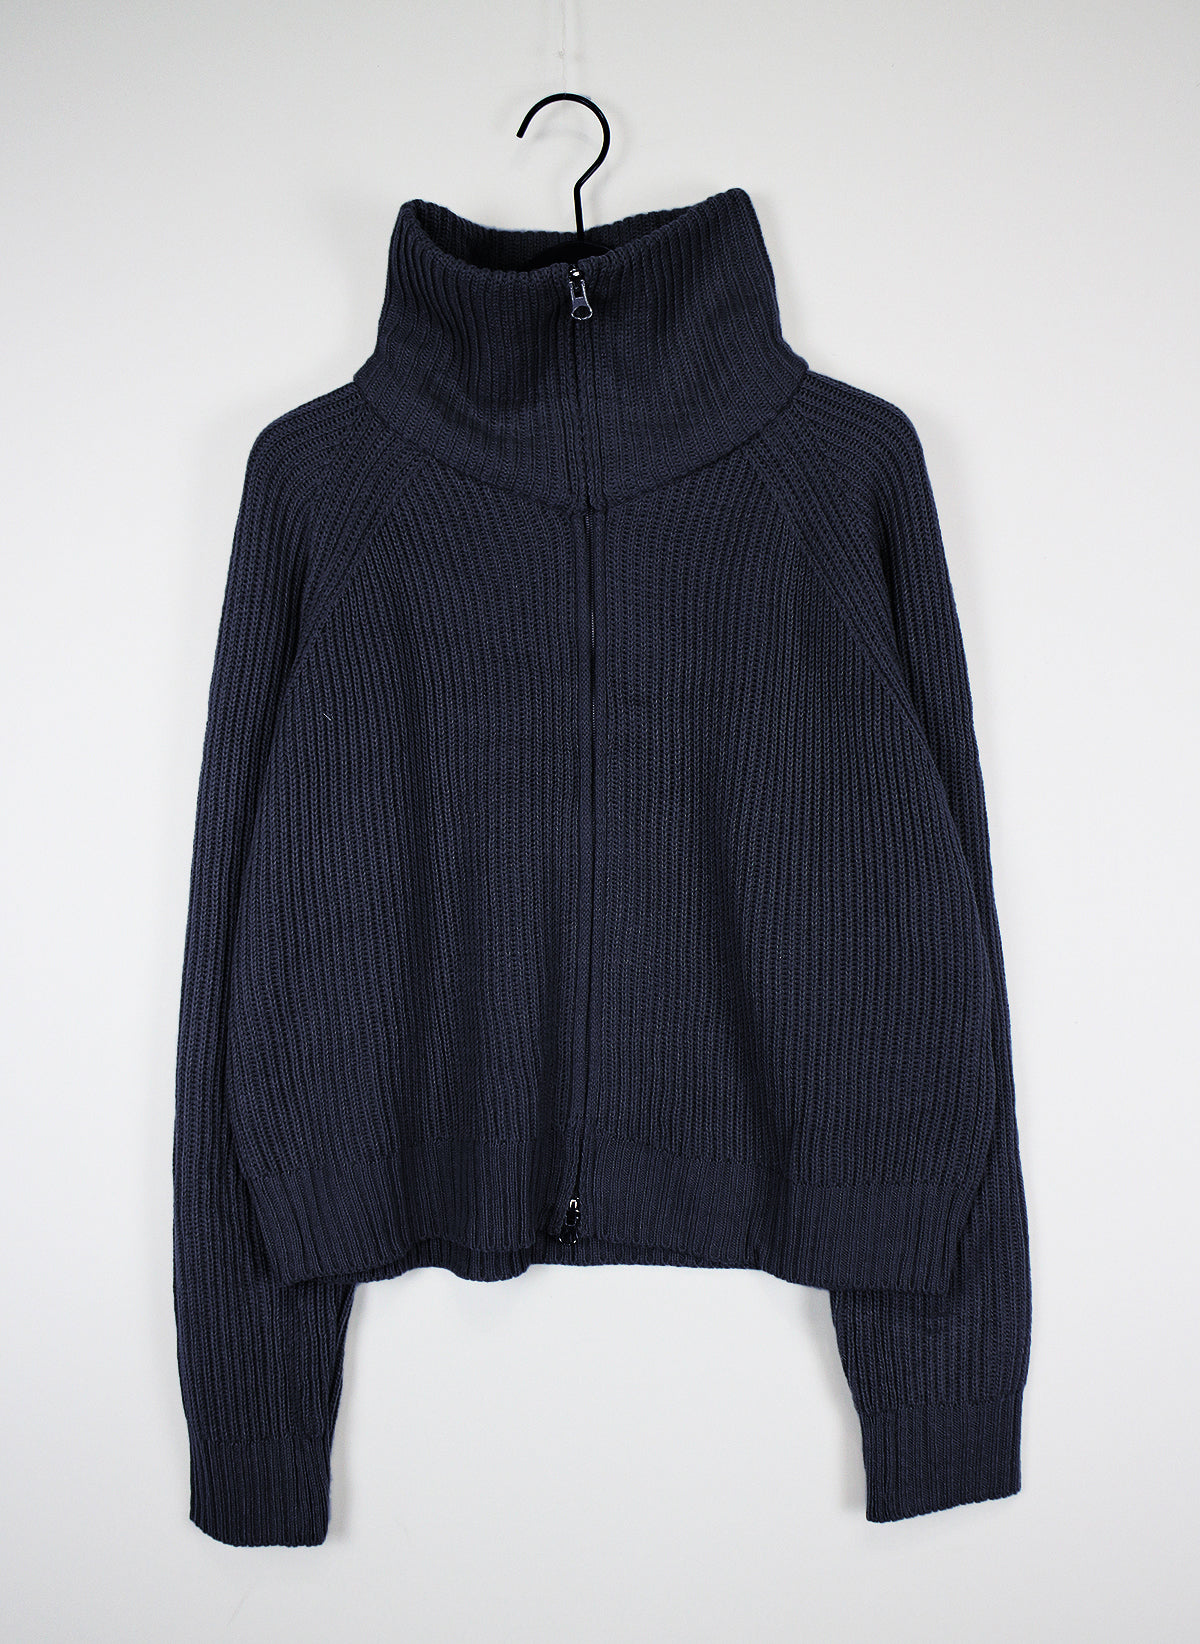 Two-way high-neck knit zip-up (2color)